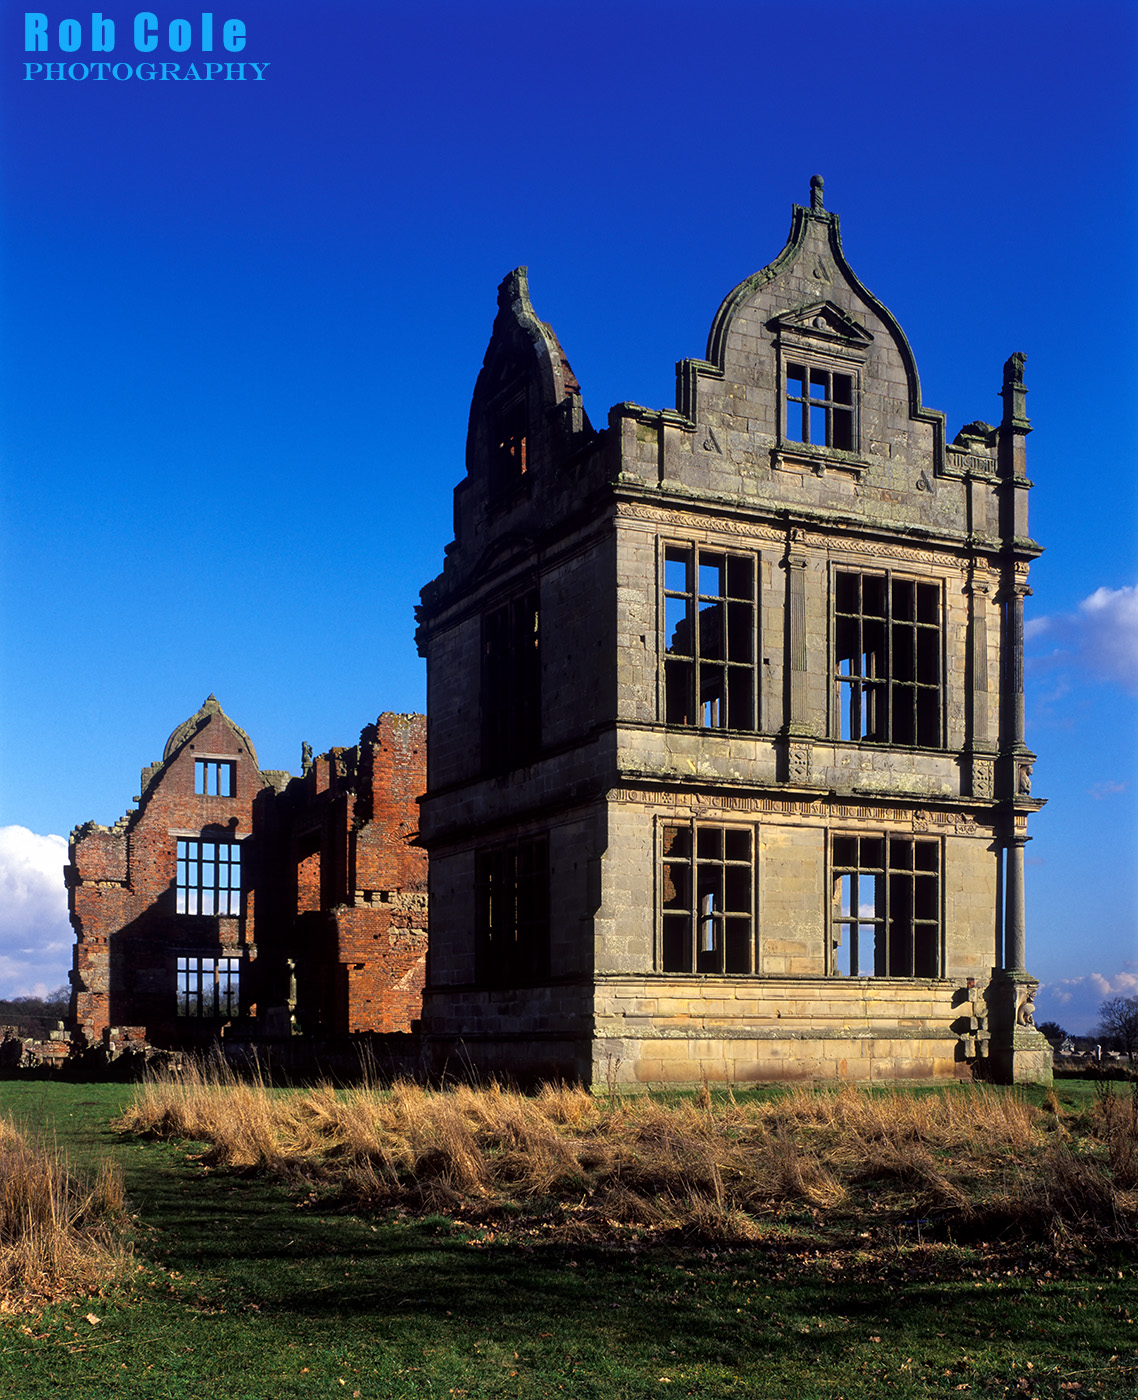 The remains of the Elizabethan mansion at Moreton Corbet in Shropshire